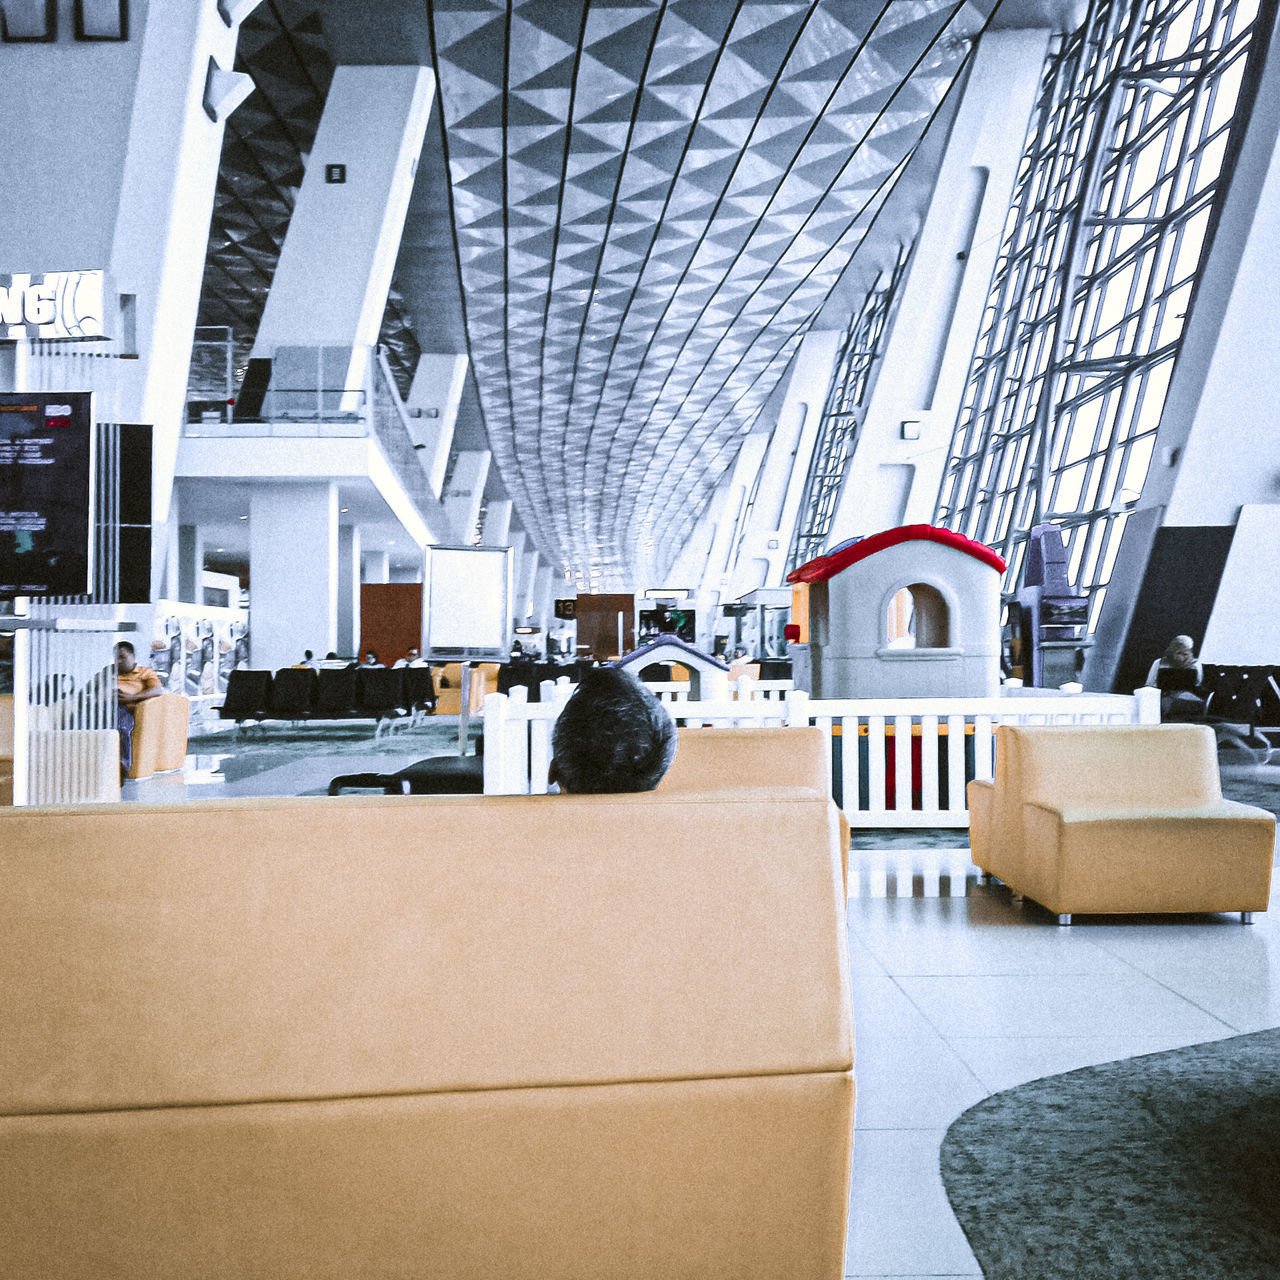 cardboard box, cardboard, box, architecture, indoors, transportation, business, interior design, built structure, furniture, building, container, domestic room, office, moving house, couch, no people, seat, technology